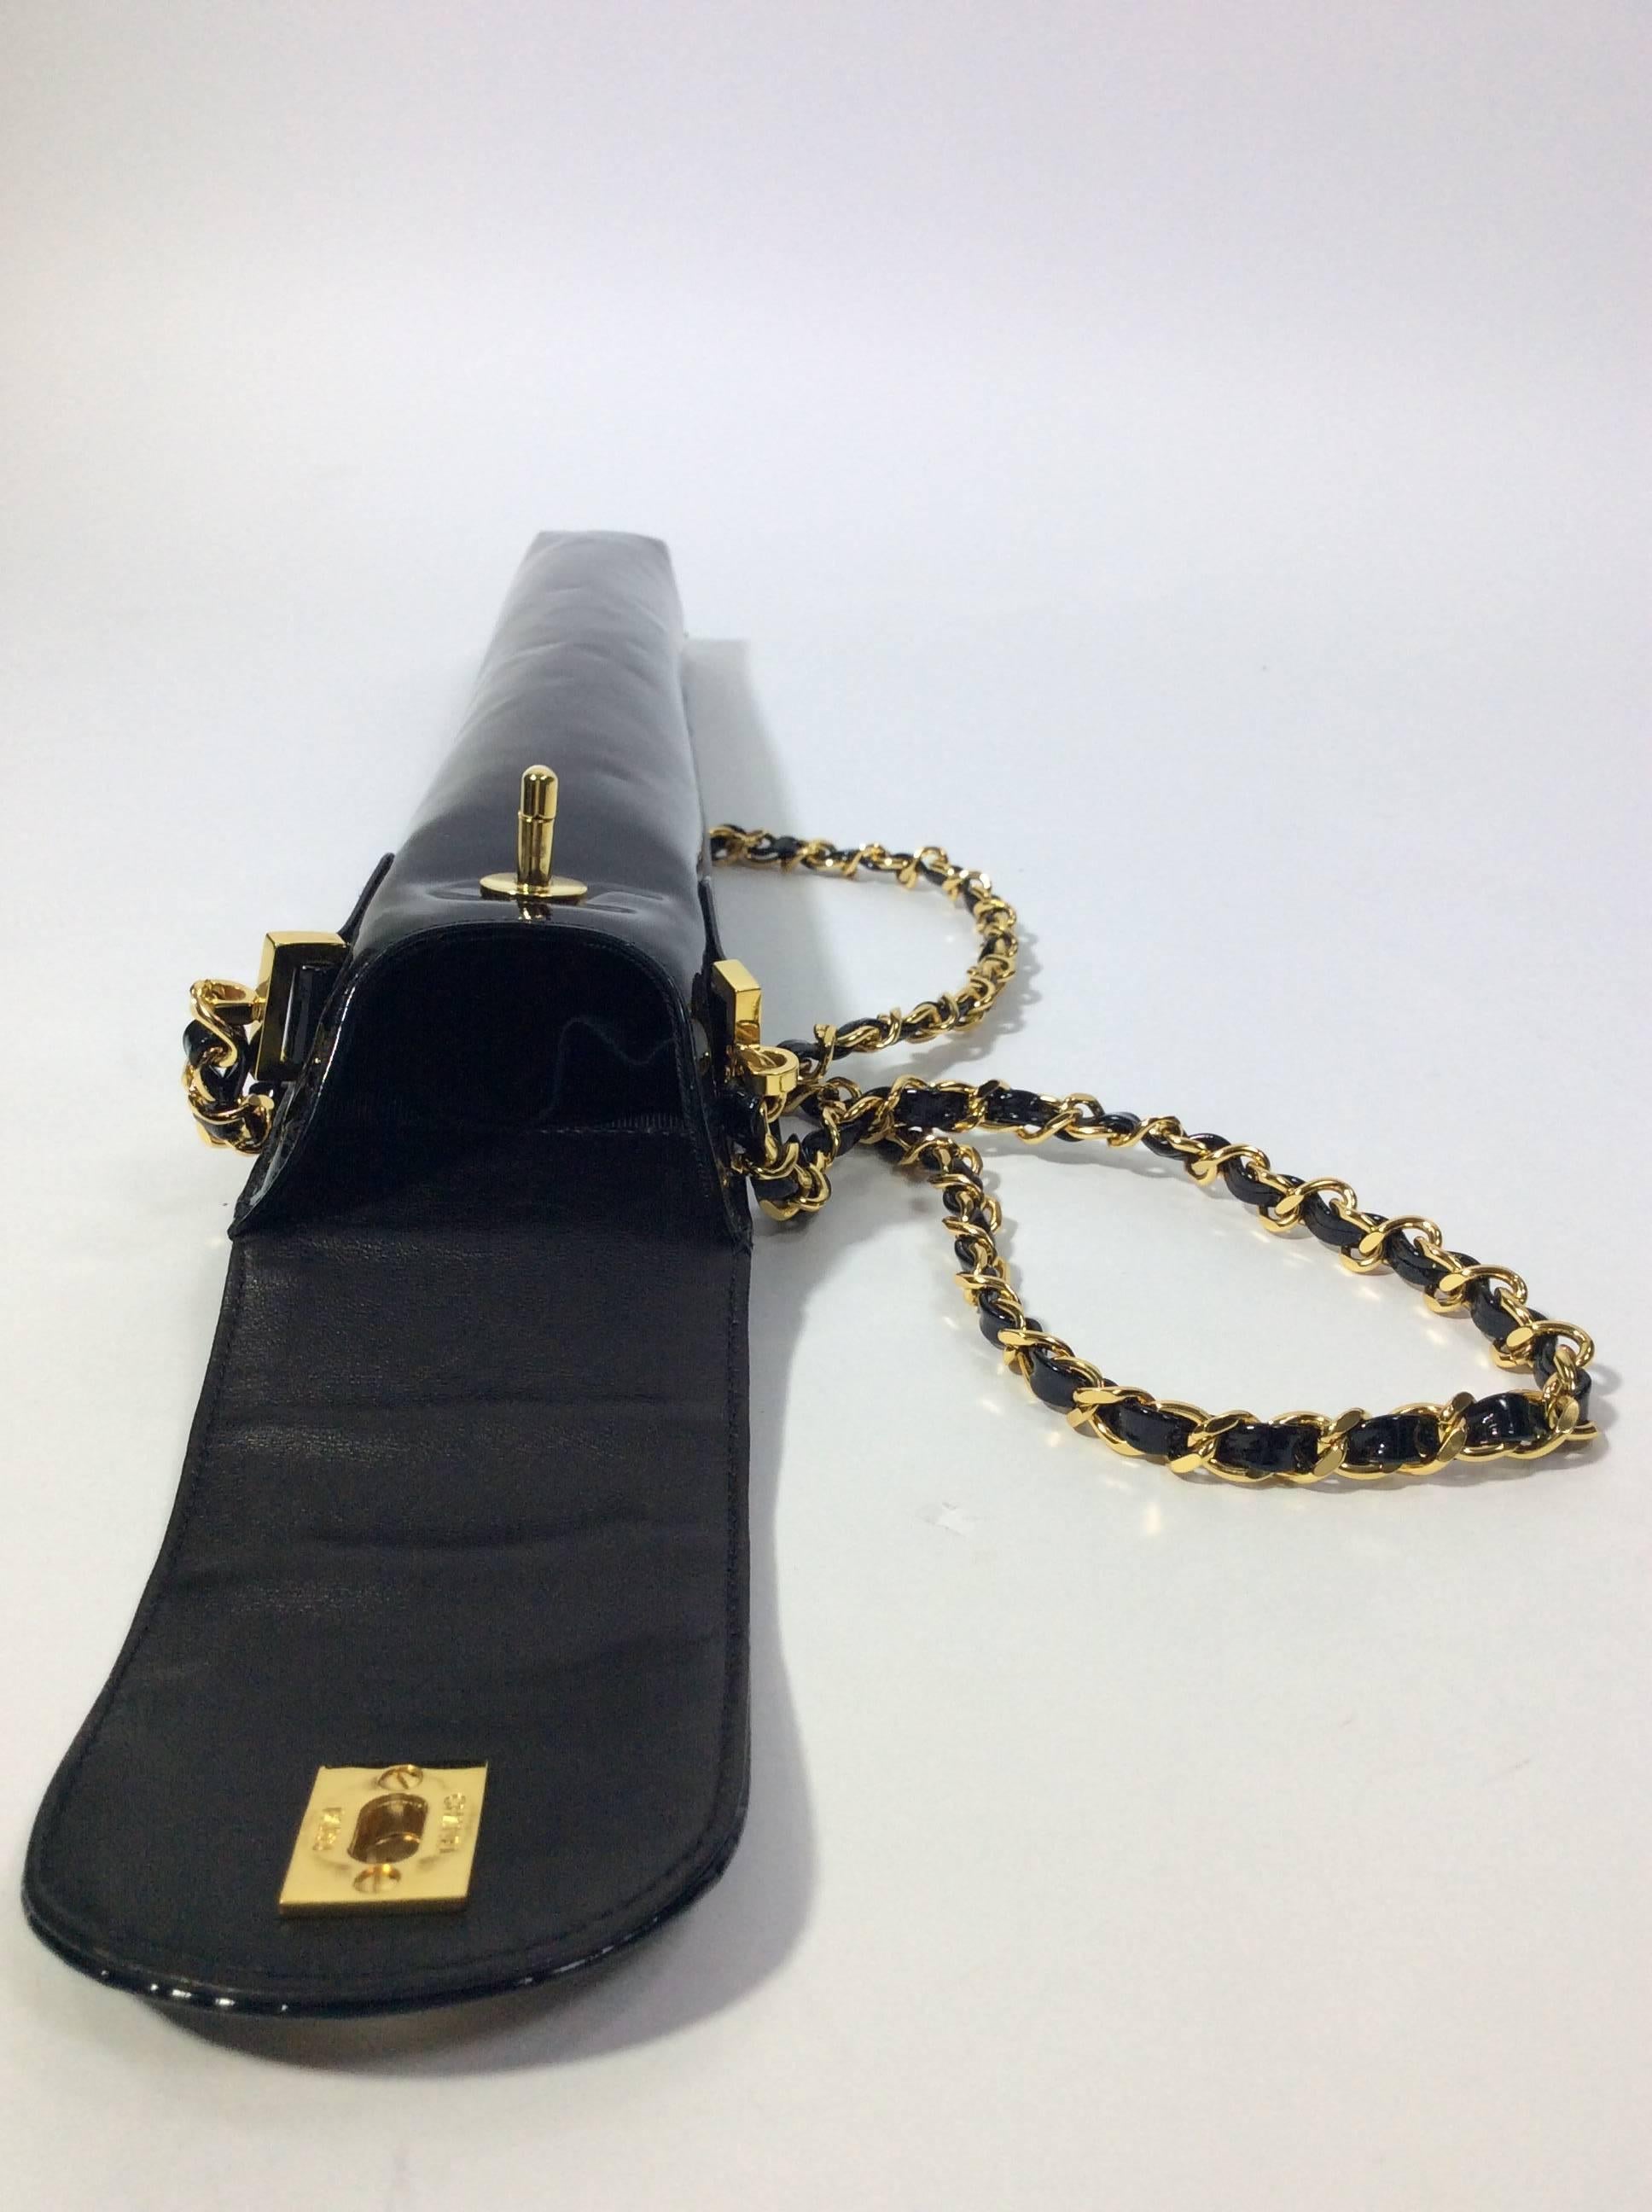 Chanel Black Patent Leather Umbrella Carrier 5